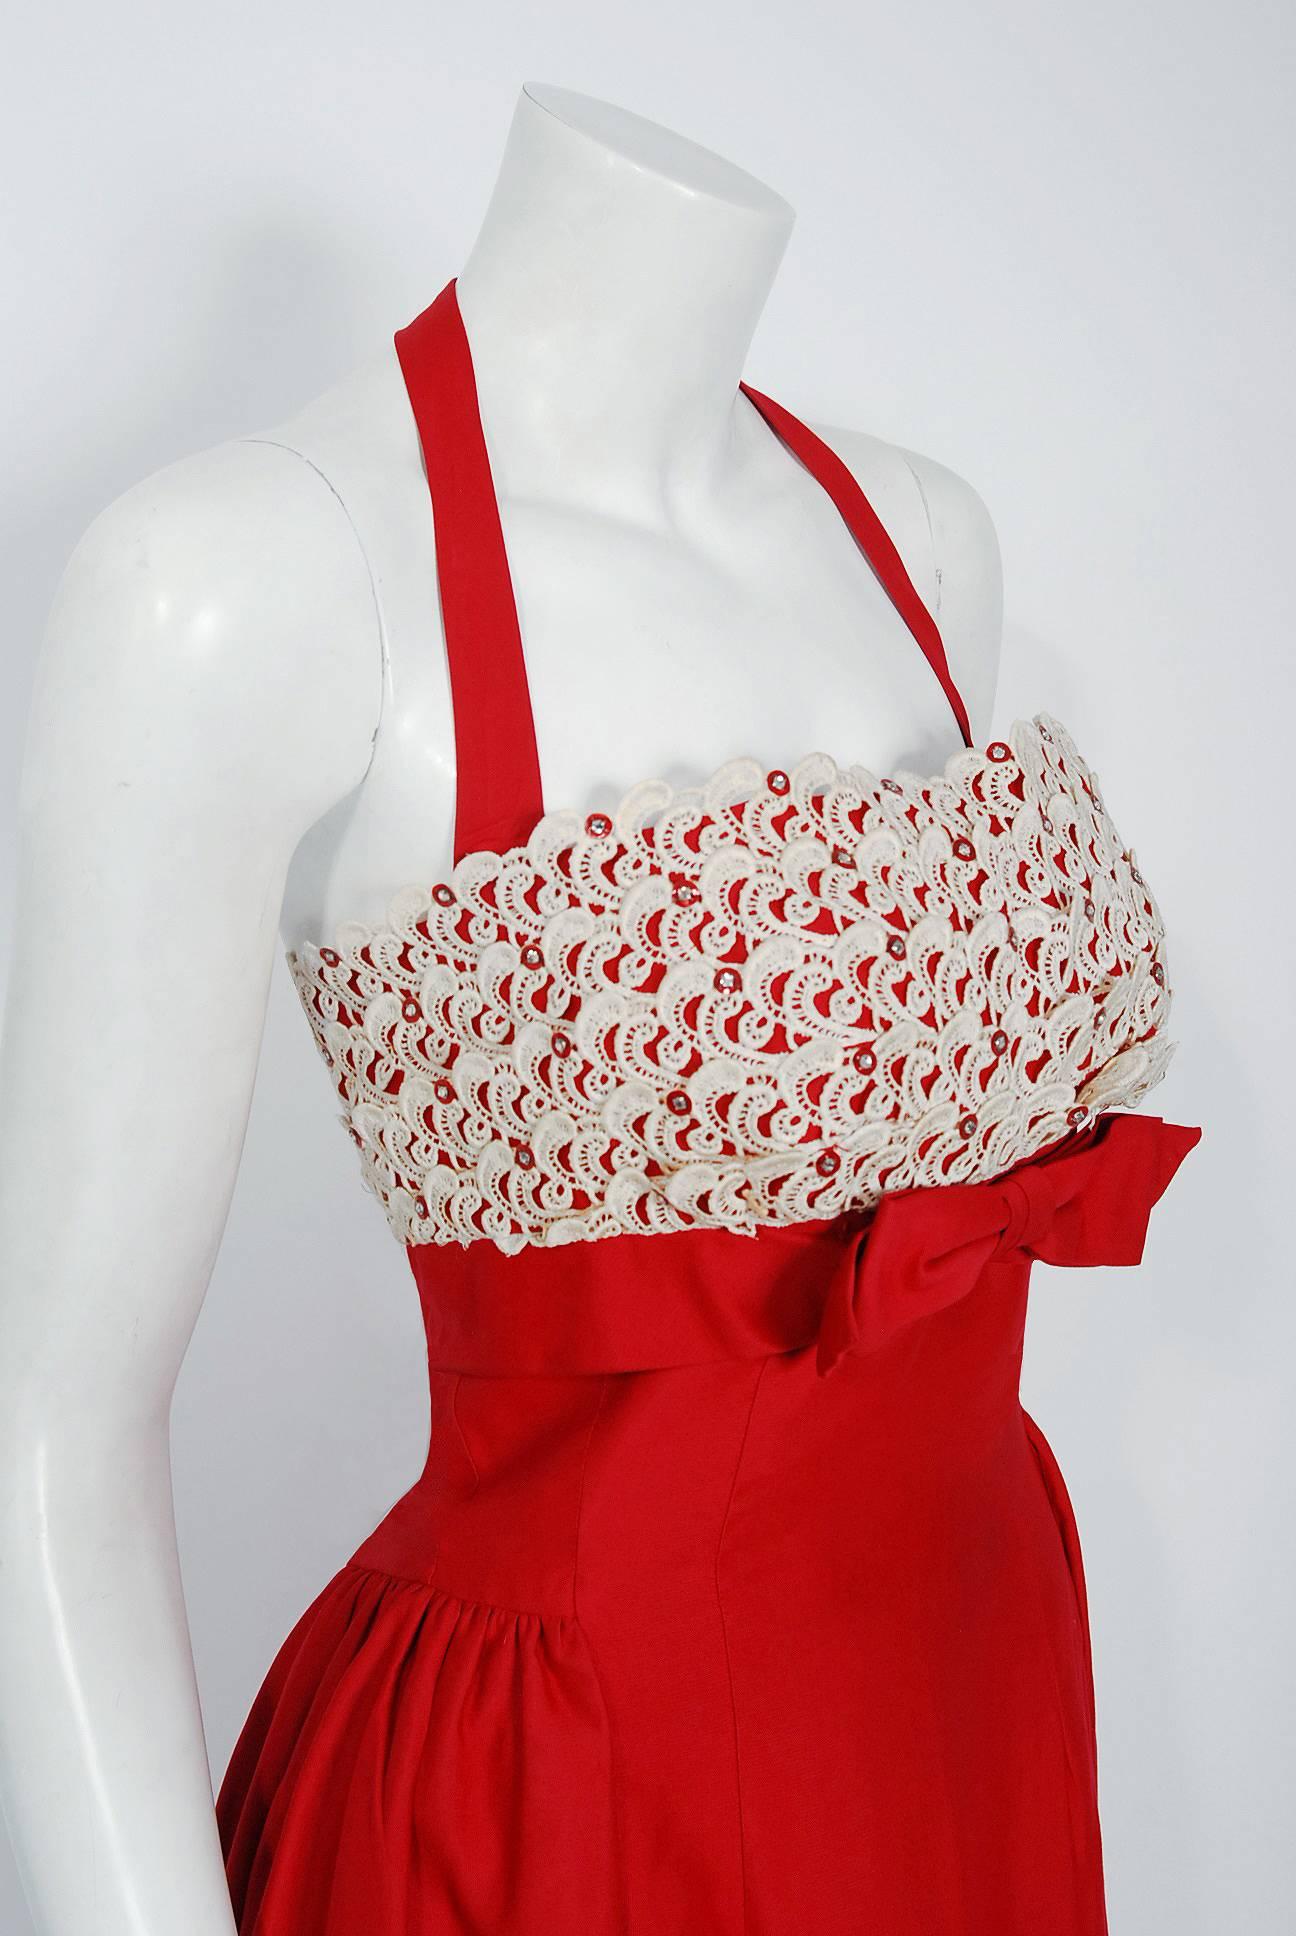 An amazing and highly stylized 1950's cocktail sundress by the Lou-Ette California designer label. This gorgeous garment is fashioned from a ruby-red polished cotton silk blend with ivory lace applique. The silhouette is classic pin-up "femme